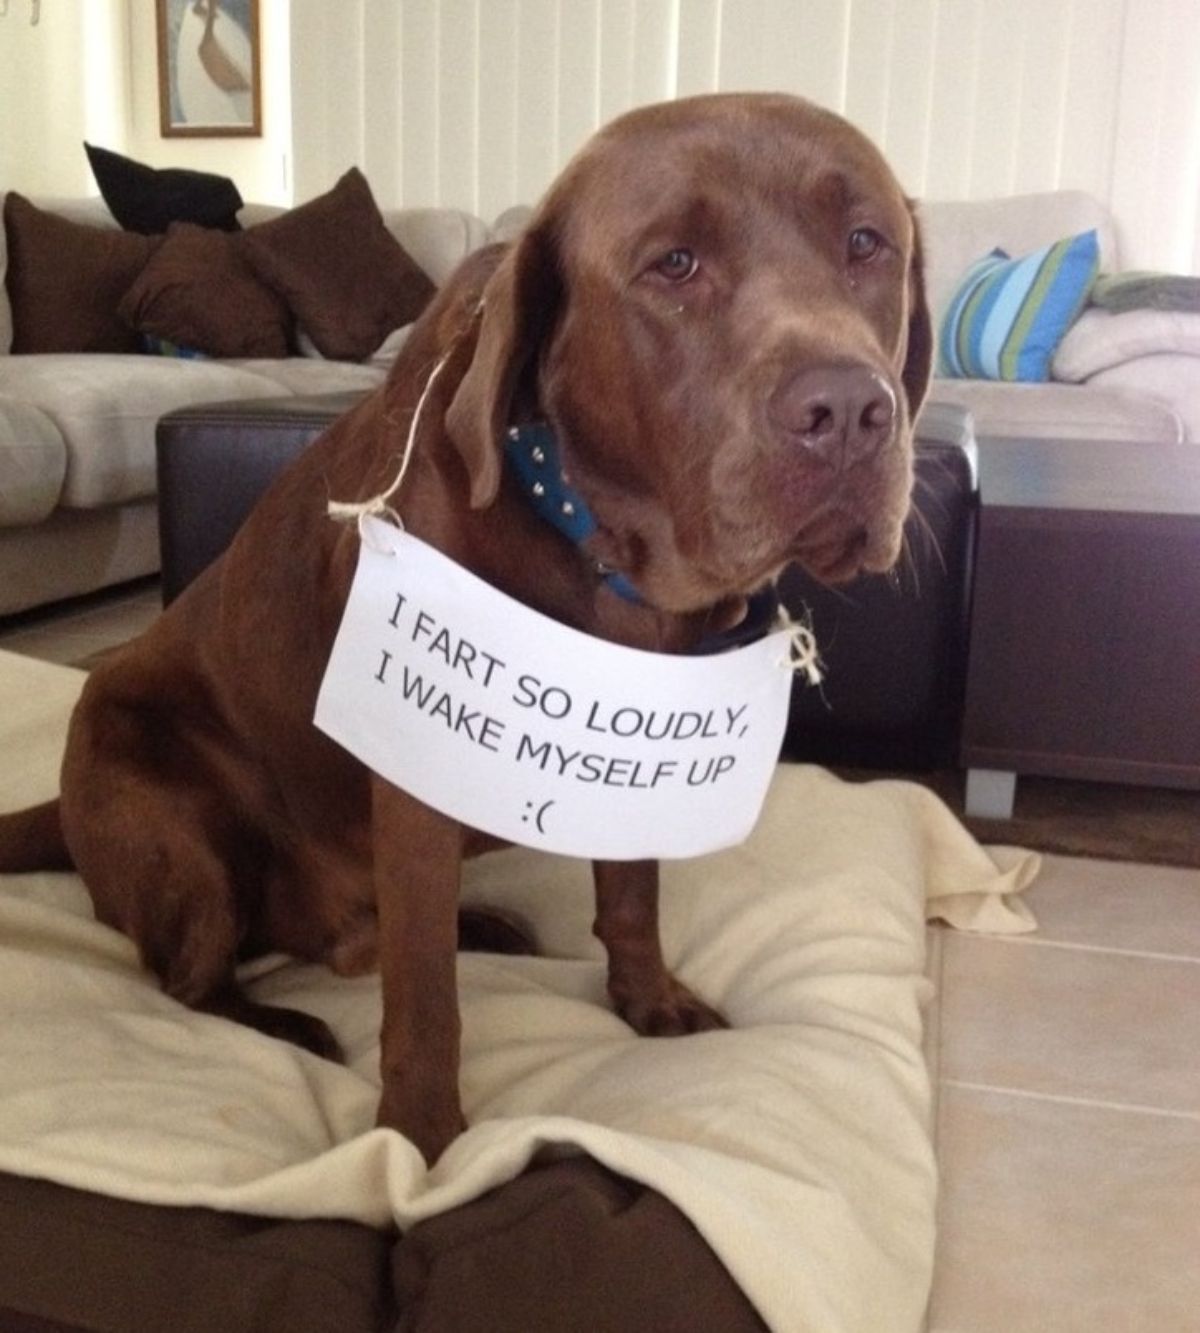 brown labrador sitting on a beige sofa with a note saying "I fart so loudly, I wake myself up :("